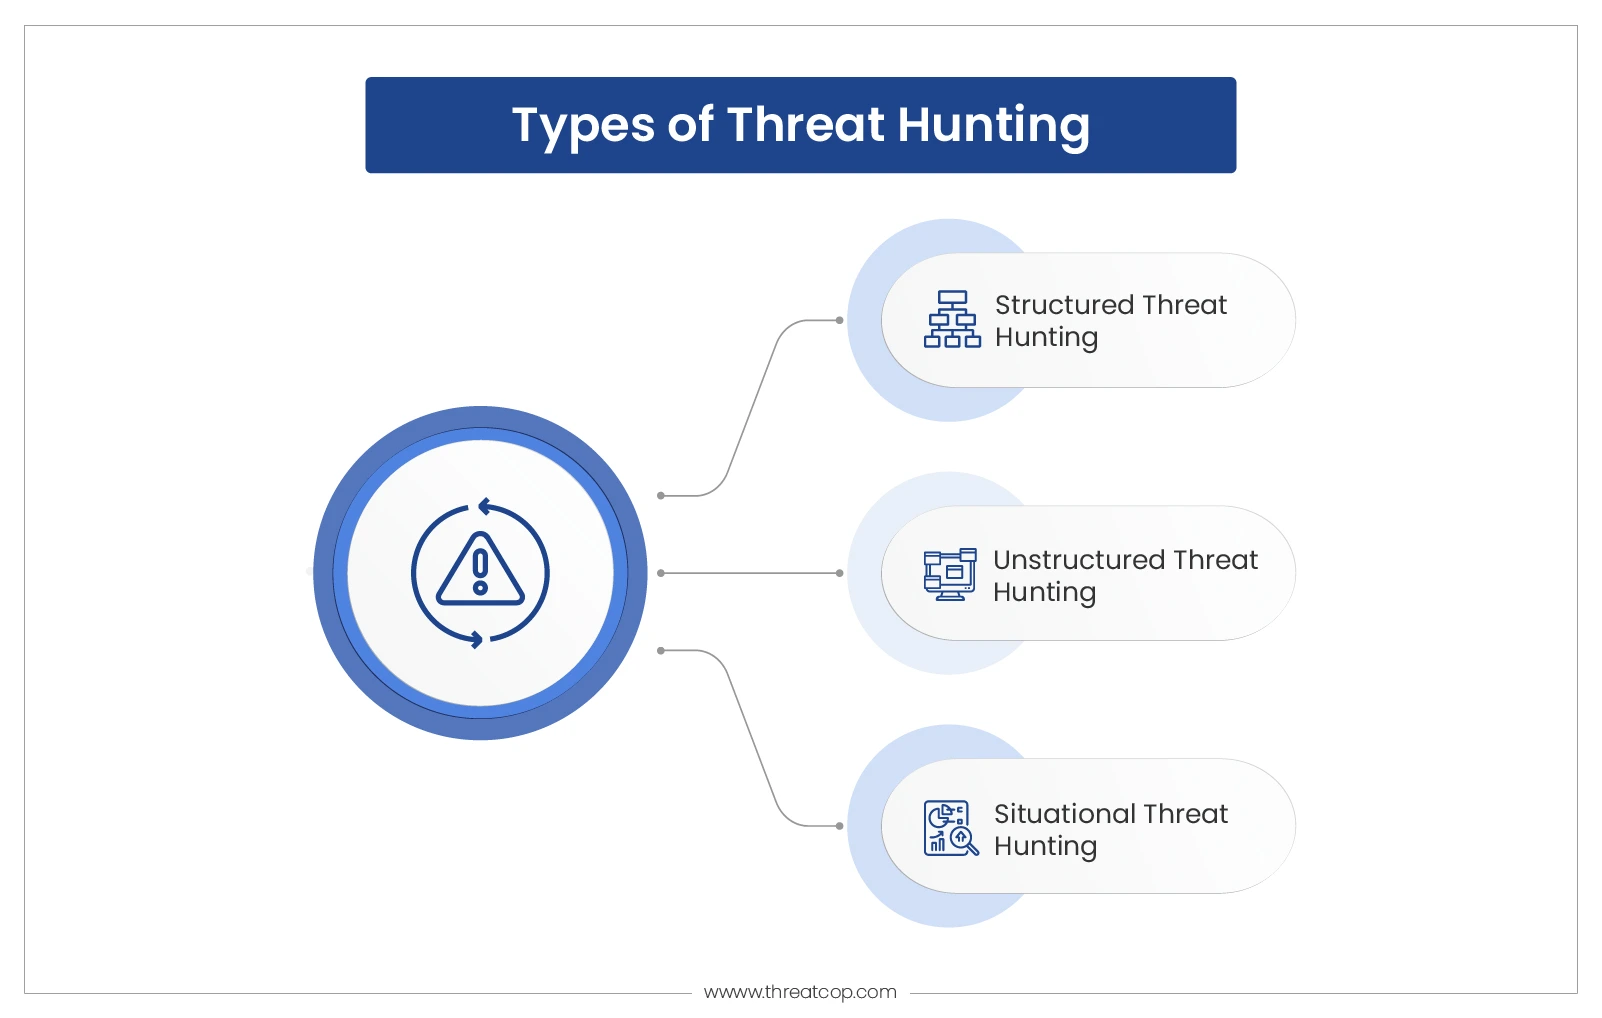 Types of Threat Hunting